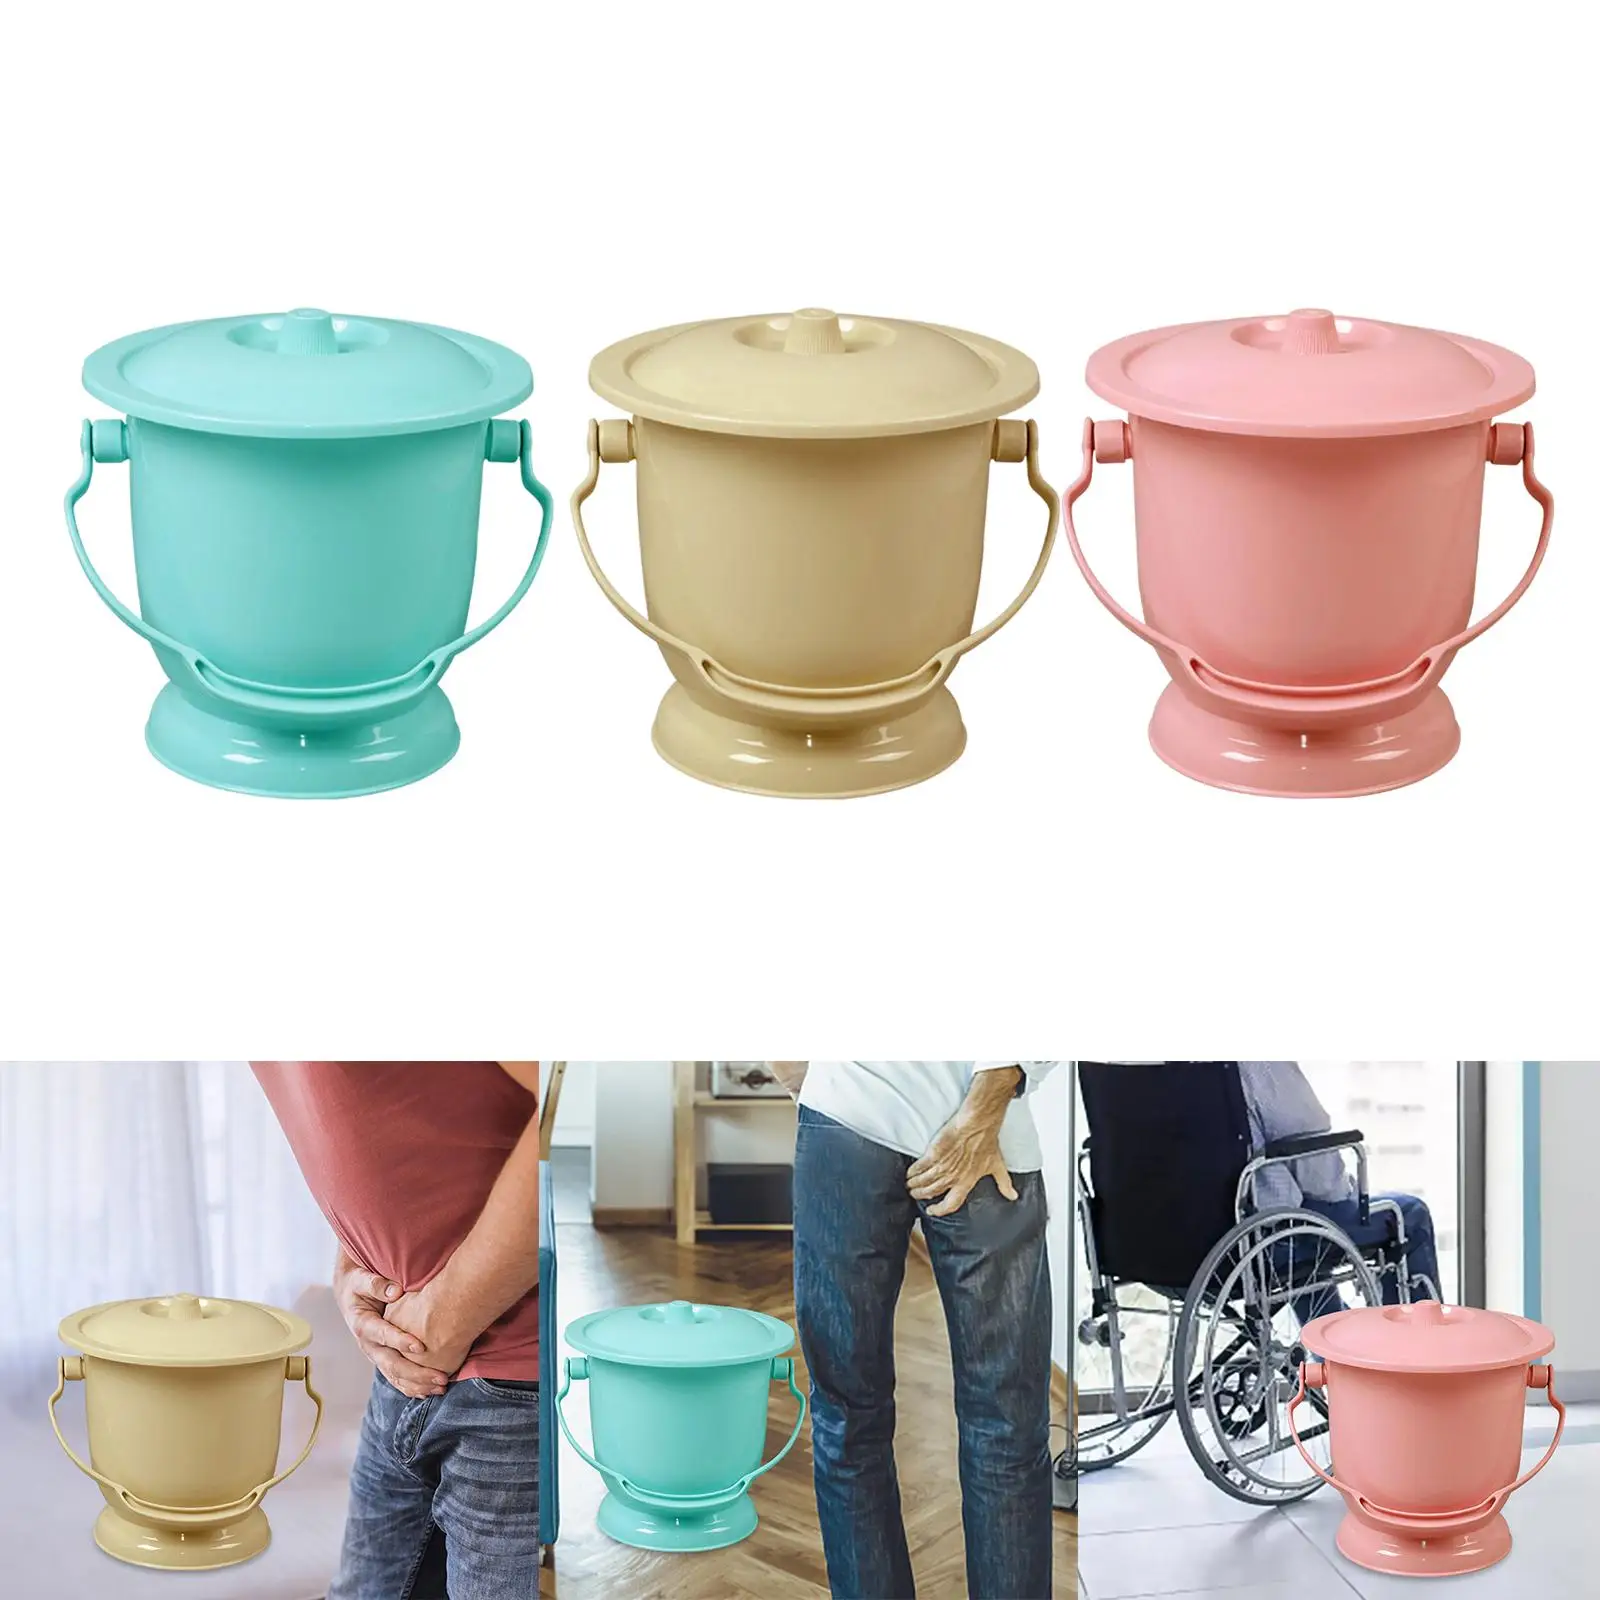 Chamber Pot with Lid Bedpan Spittoon Long Lasting Use Handheld Urinal Bottle